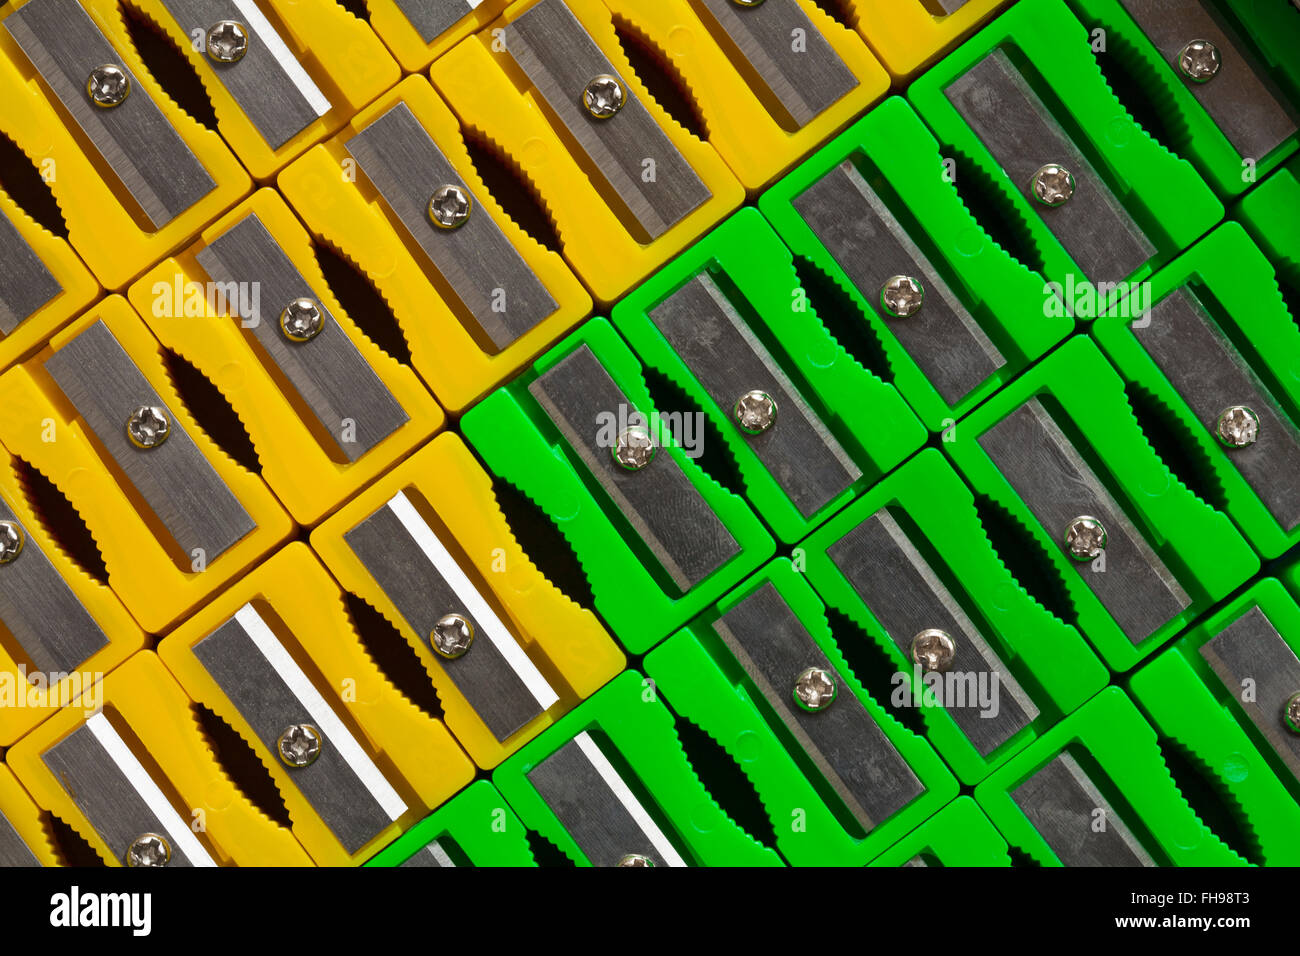 Rows of green and yellow plastic pencil sharpeners placed diagonally Stock Photo